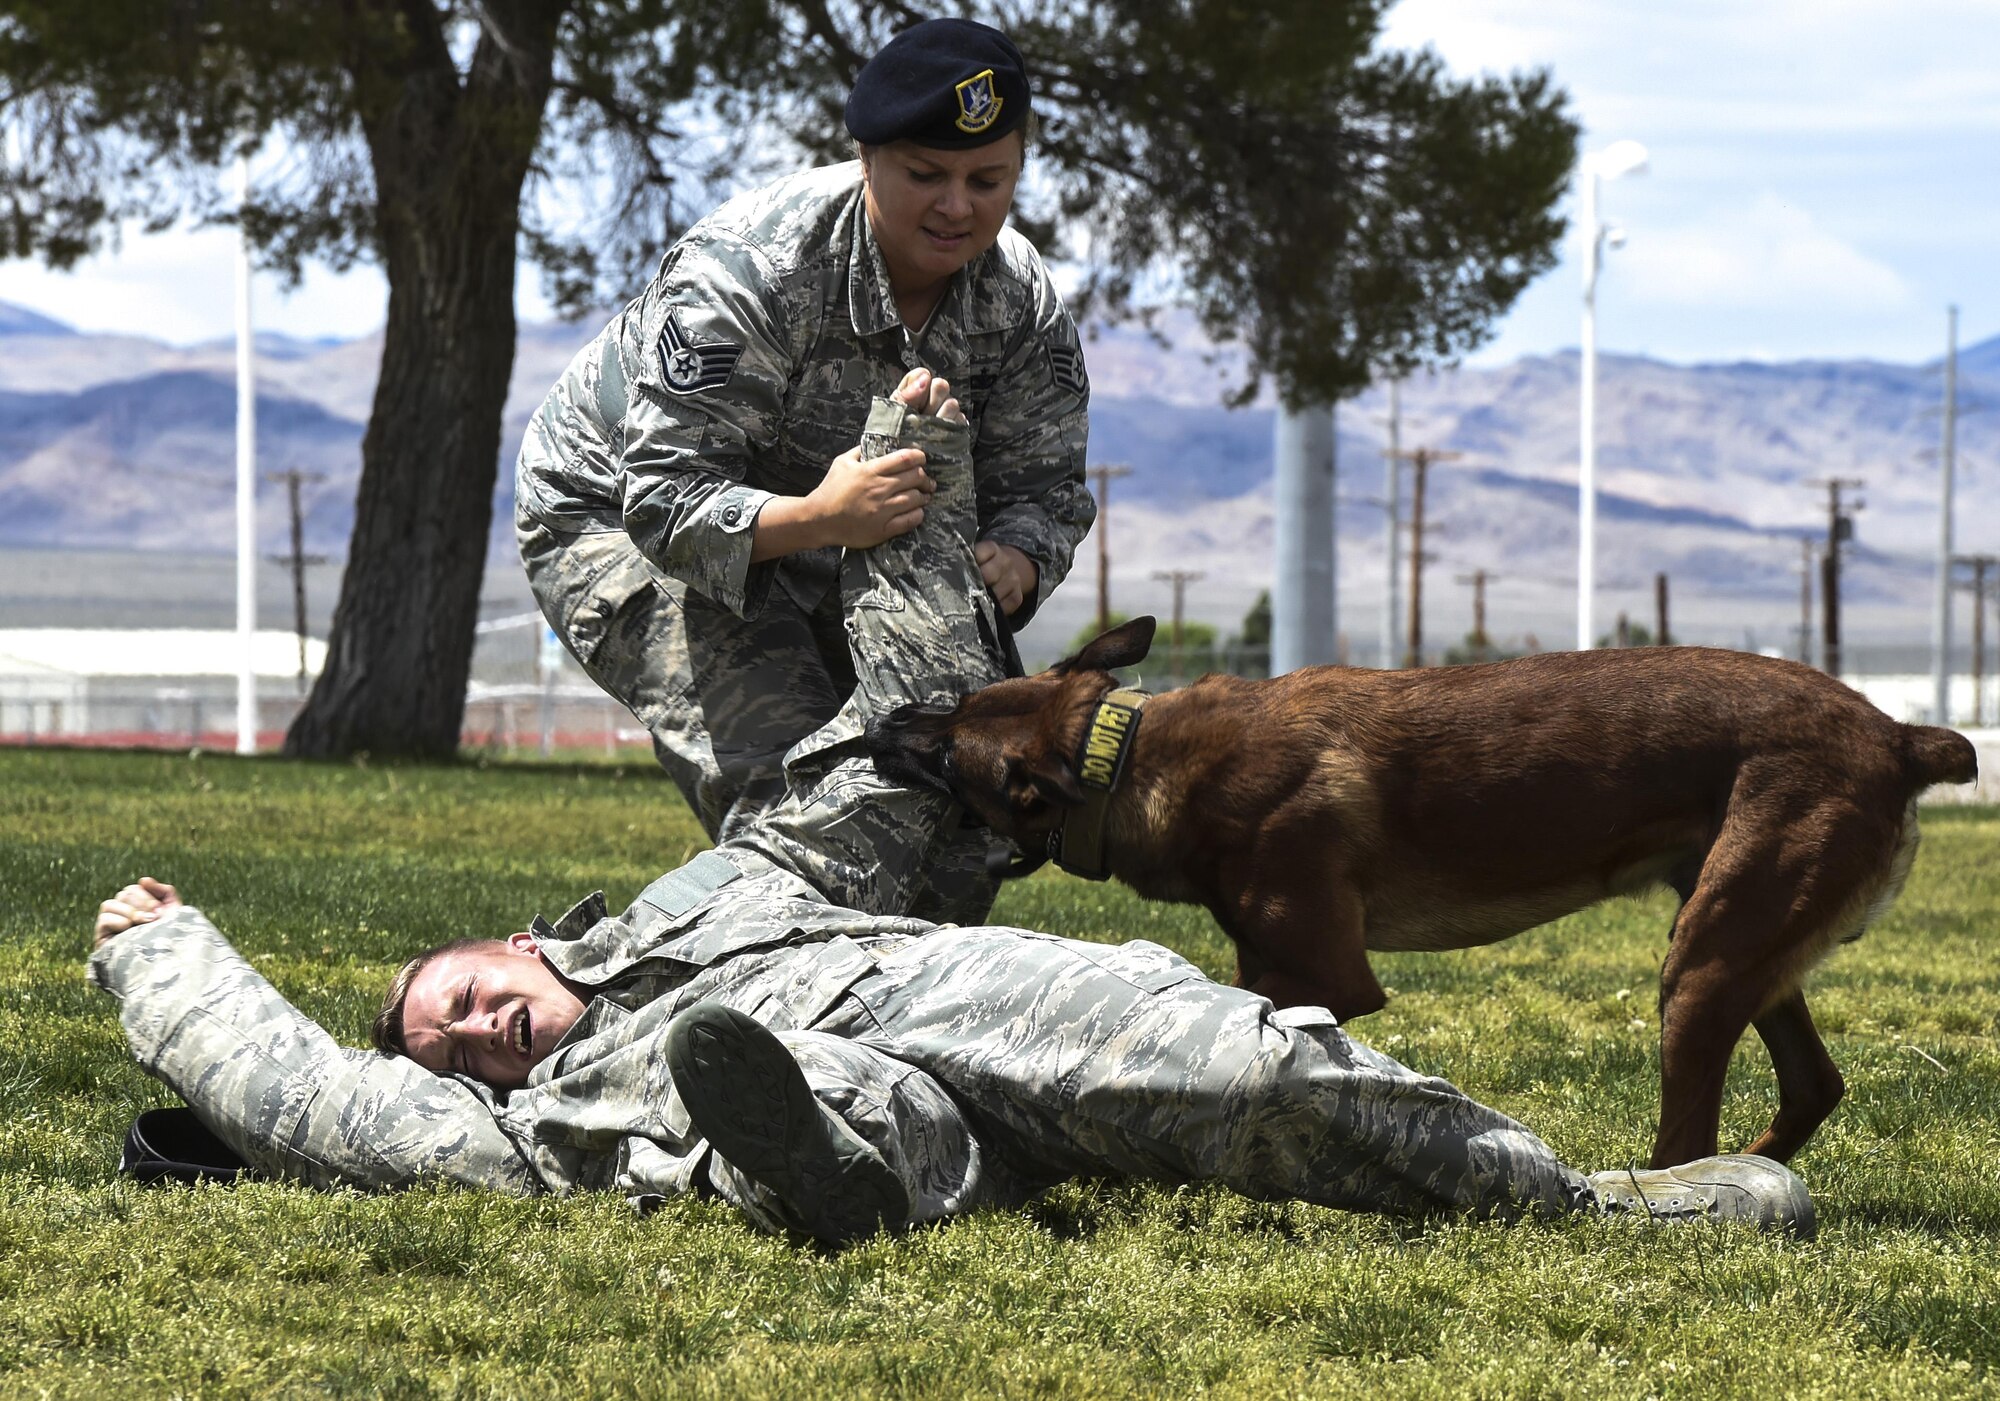 Staff Sgt. Anique, 799th Security Forces Squadron military working dog handler and Samuel, 799th SFS MWD, take down a simulated combative during a K-9 demonstration at a local high school March 17, 2016, in Indian Springs, Nevada. MWDs and their handlers train together to protect military personnel and equipment, detect explosives and conduct search and rescue operations during disasters. (U.S. Air Force photo by Senior Airman Adarius Petty/Released)